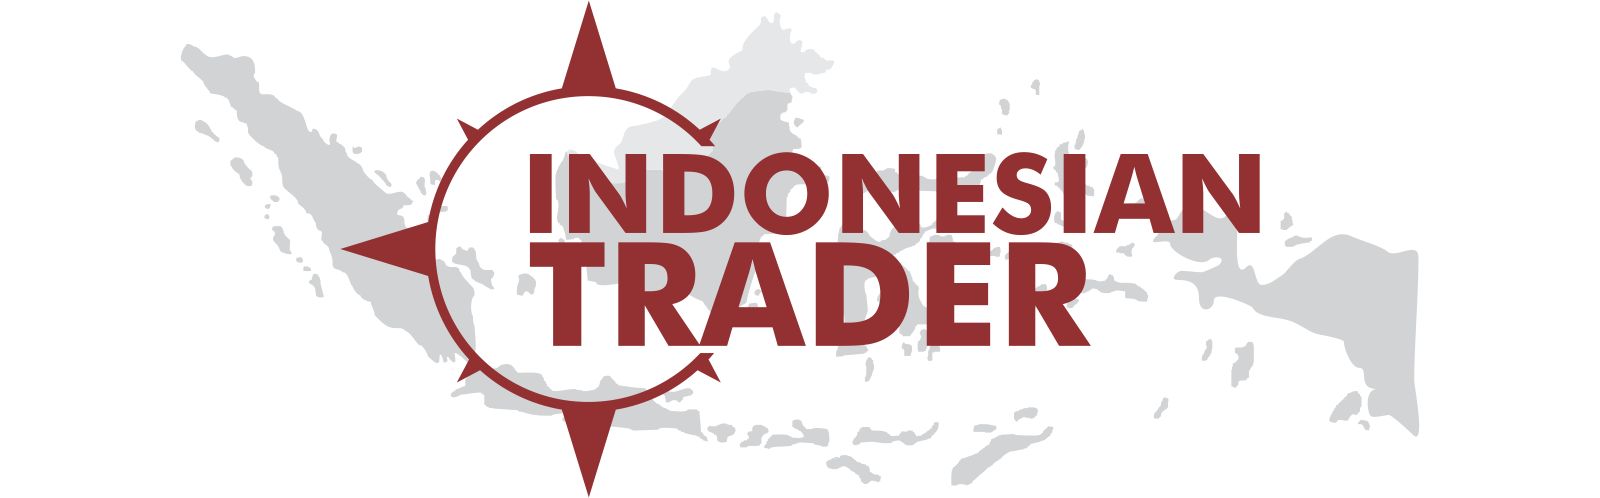 #indonesiantradersonly#